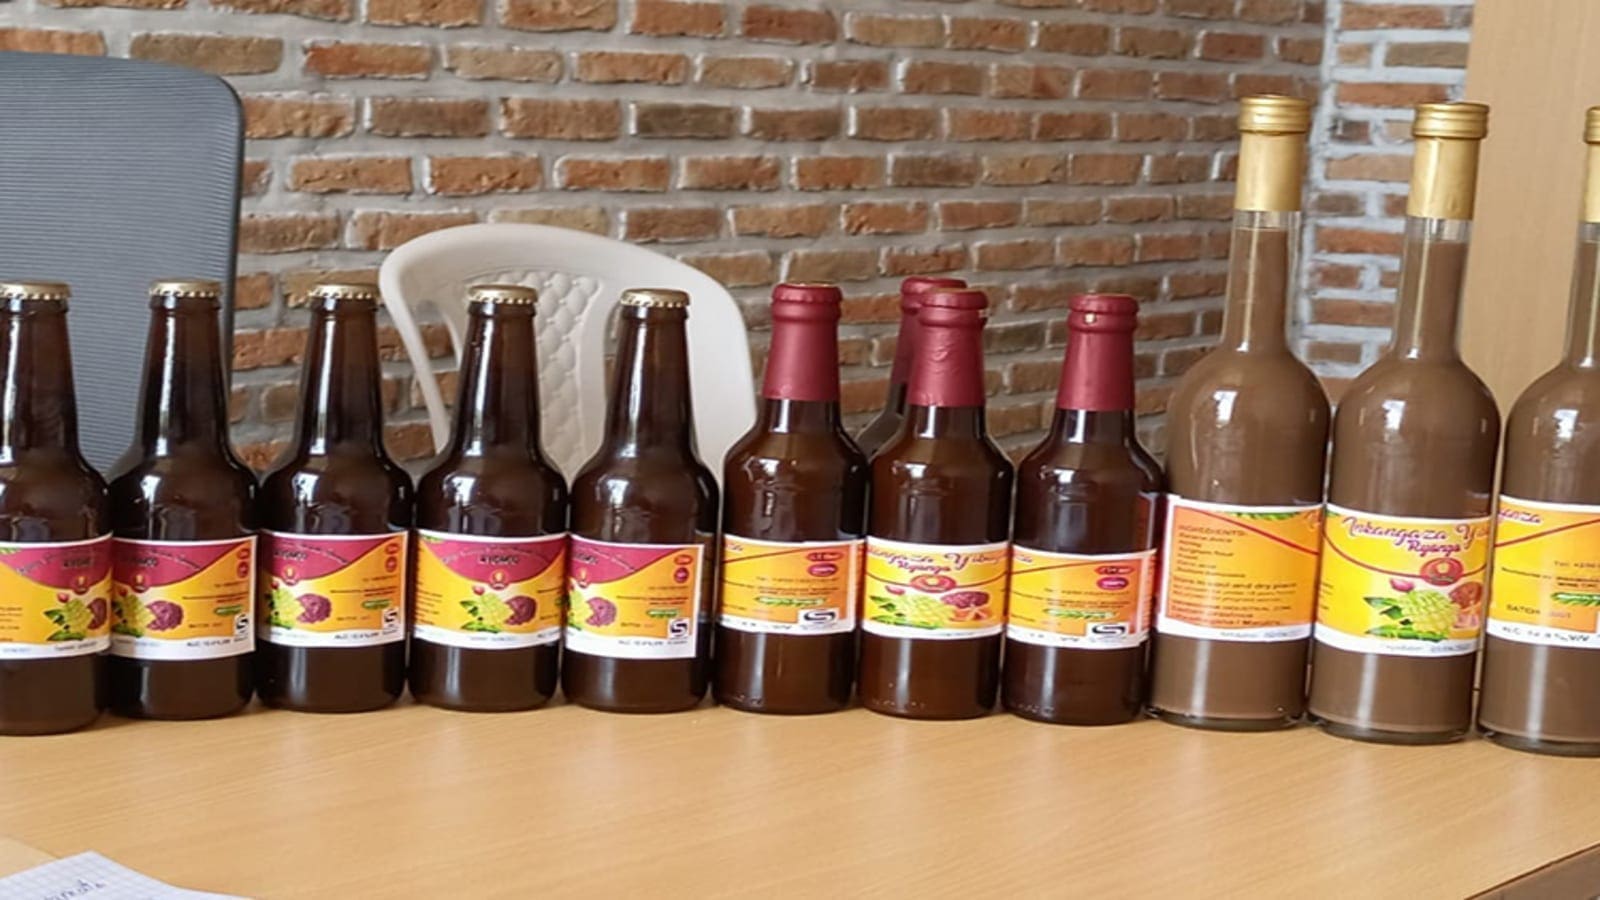 Rwanda launches new banana alcoholic beverages produced in recently opened US$1.2m factory